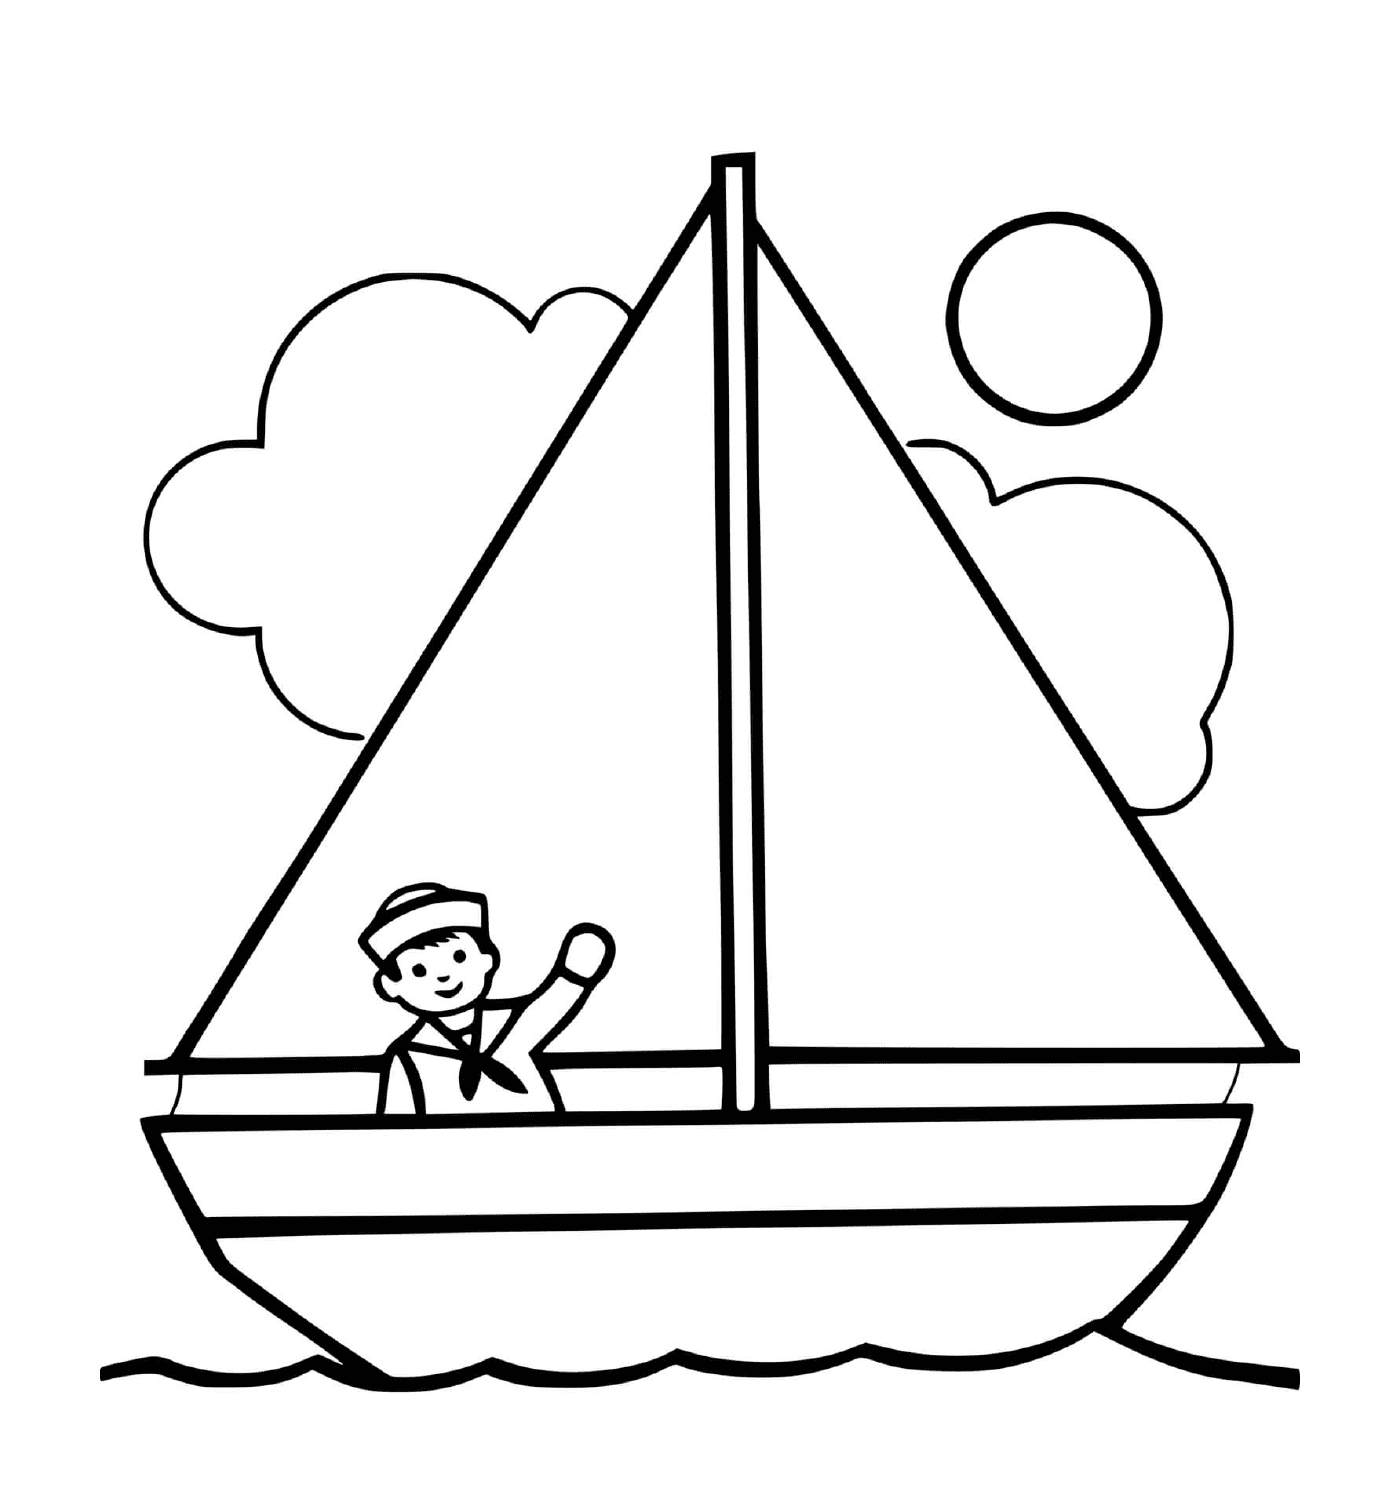  A man in a boat with a sun and a captain 